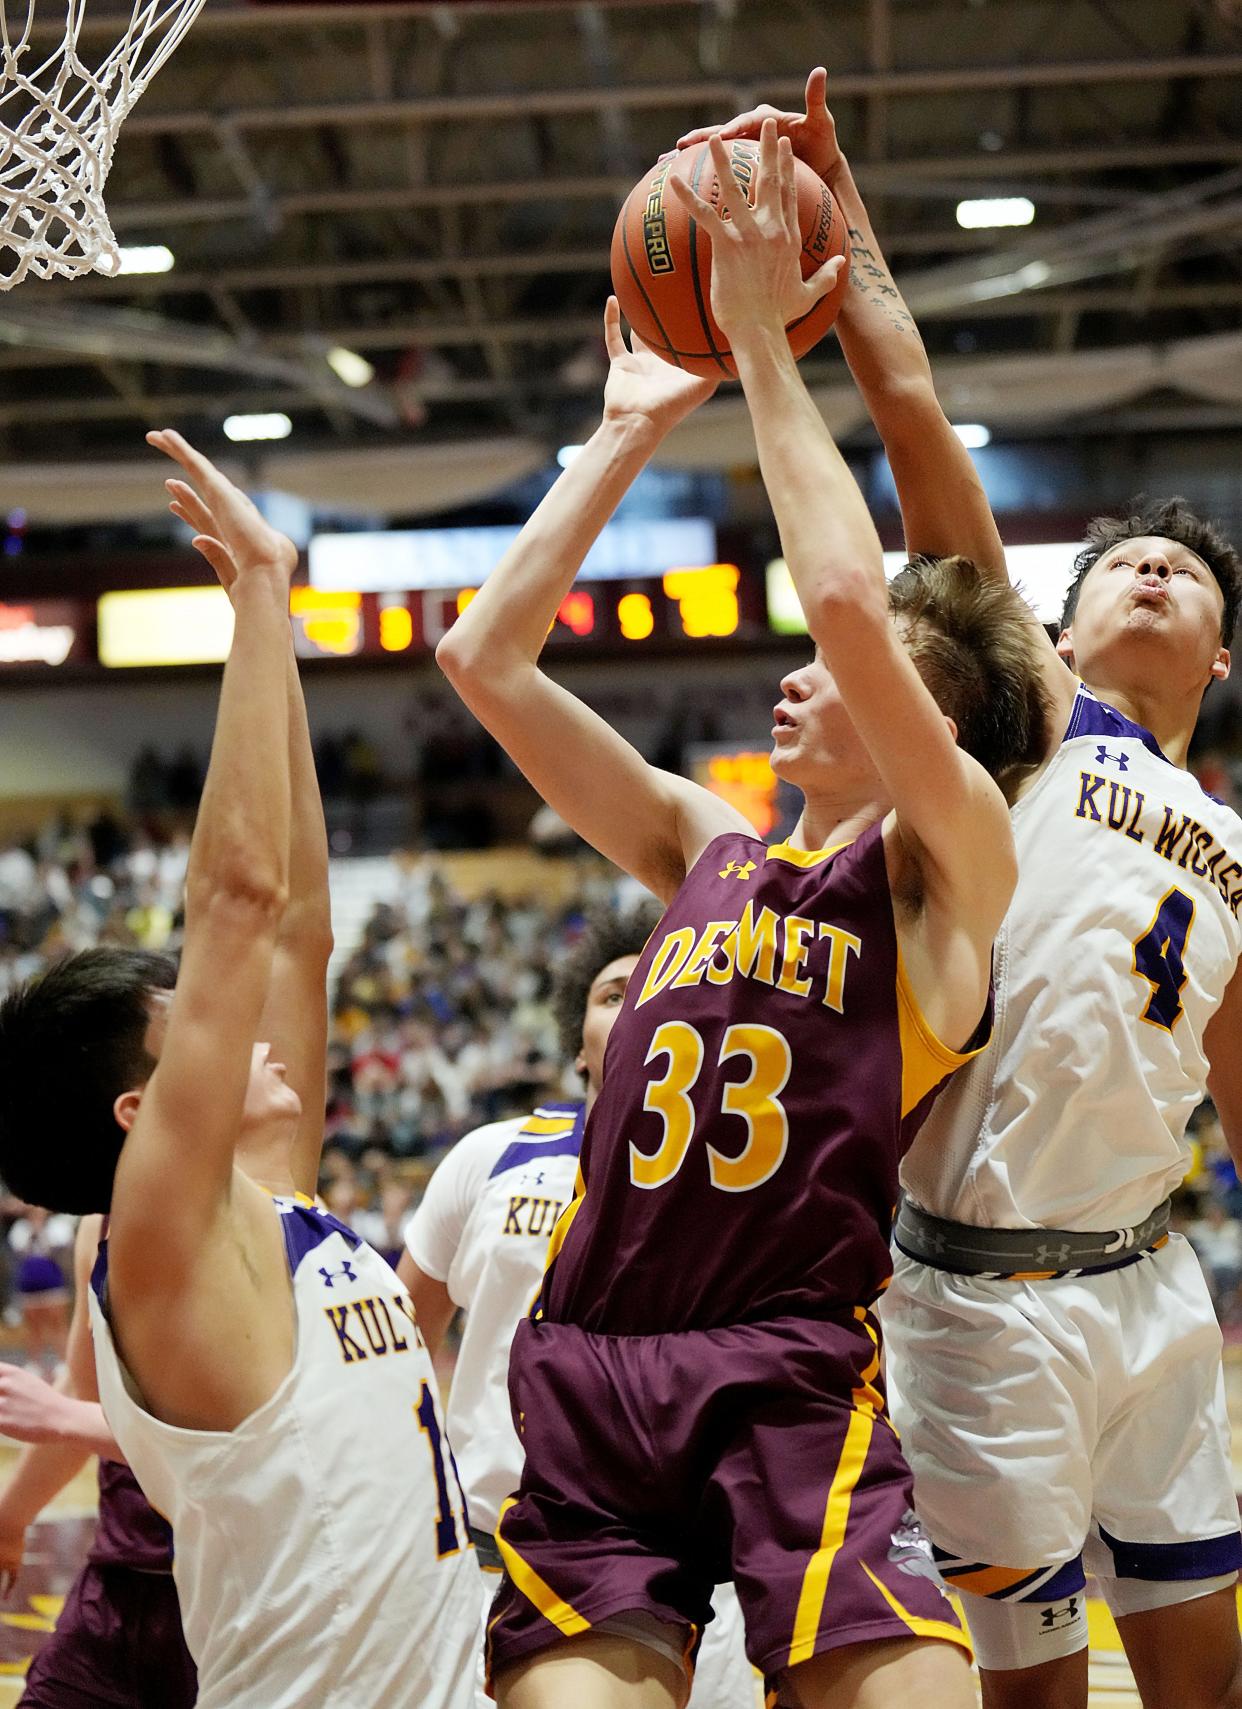 De Smet's George Jensen (33) shoots against Lower Brule's Ellwyn Langdeau and Brian LaRoche Jr. (4) during the championship game of the state Class B boys basketball tournament on Saturday, March 18, 2023 at the Barnett Center in Aberdeen.